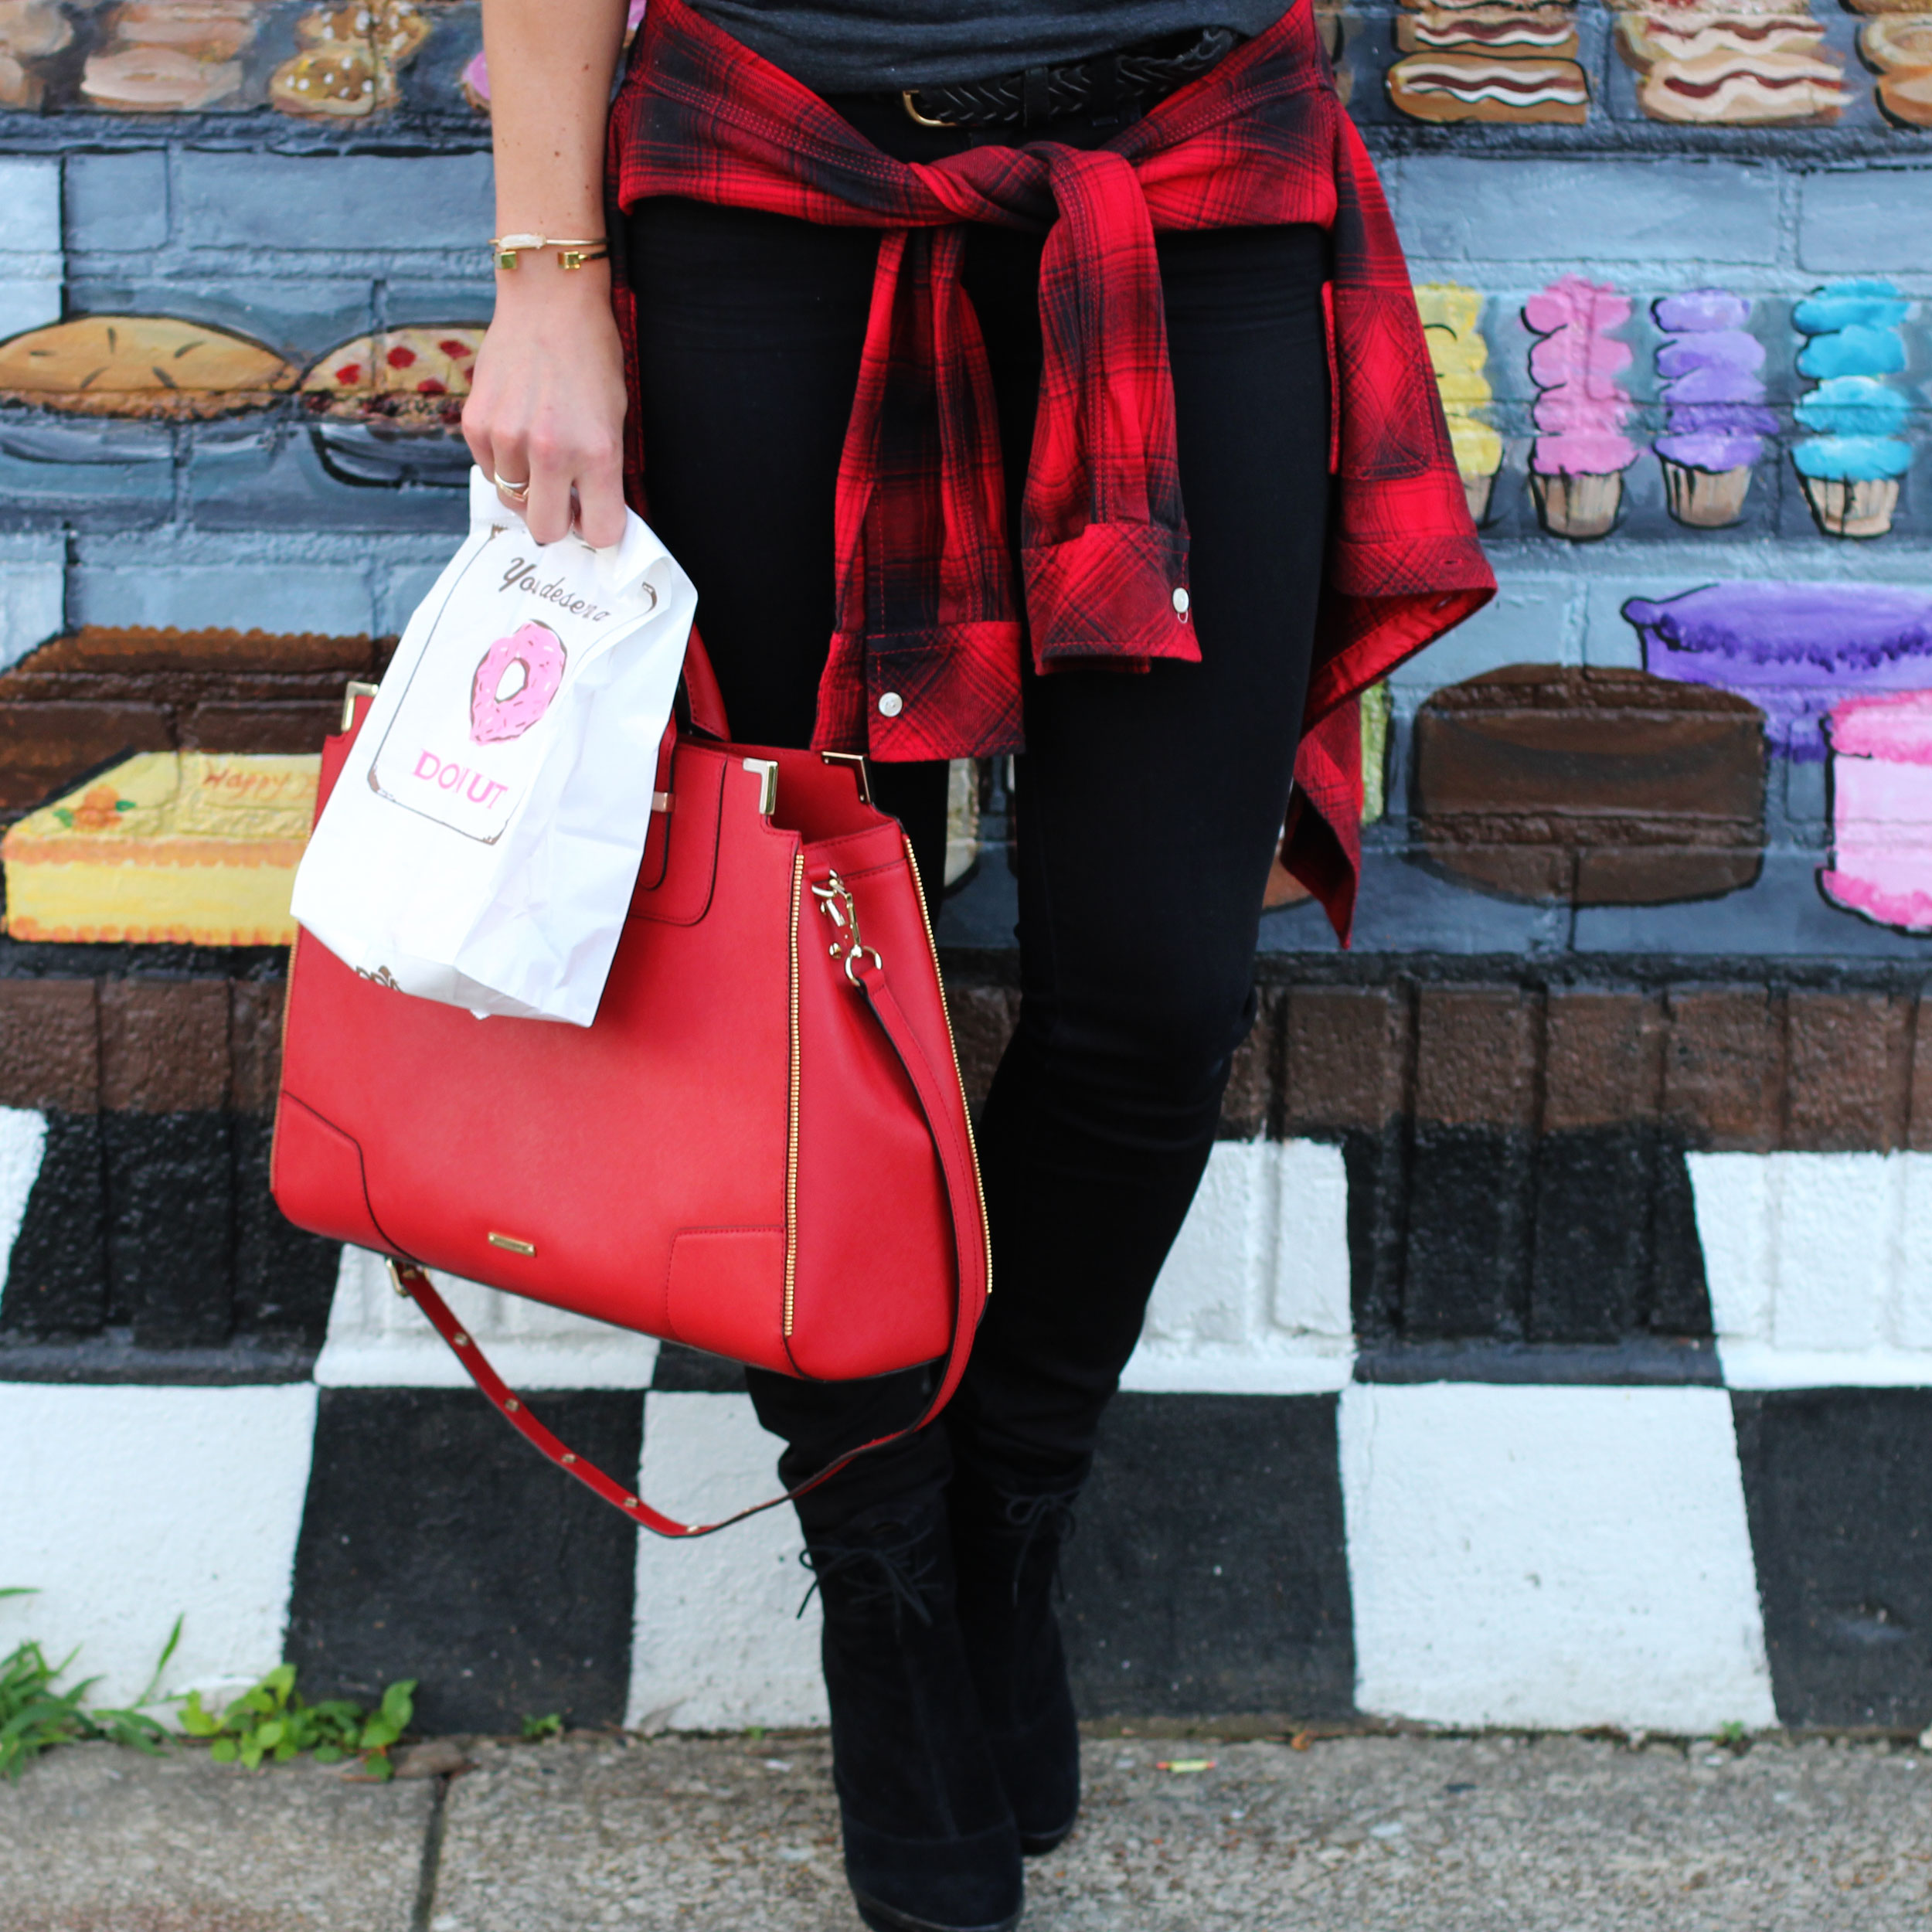 Doughnuts Over Everything Tee, Nord's Bakery Louisville, Maple Bacon Doughnuts, J Brand Skinny Jeans, Plaid Shirt, House of Harlow 1960 Necklace, Rebecca Minkoff Amorous Satchel, Donuts